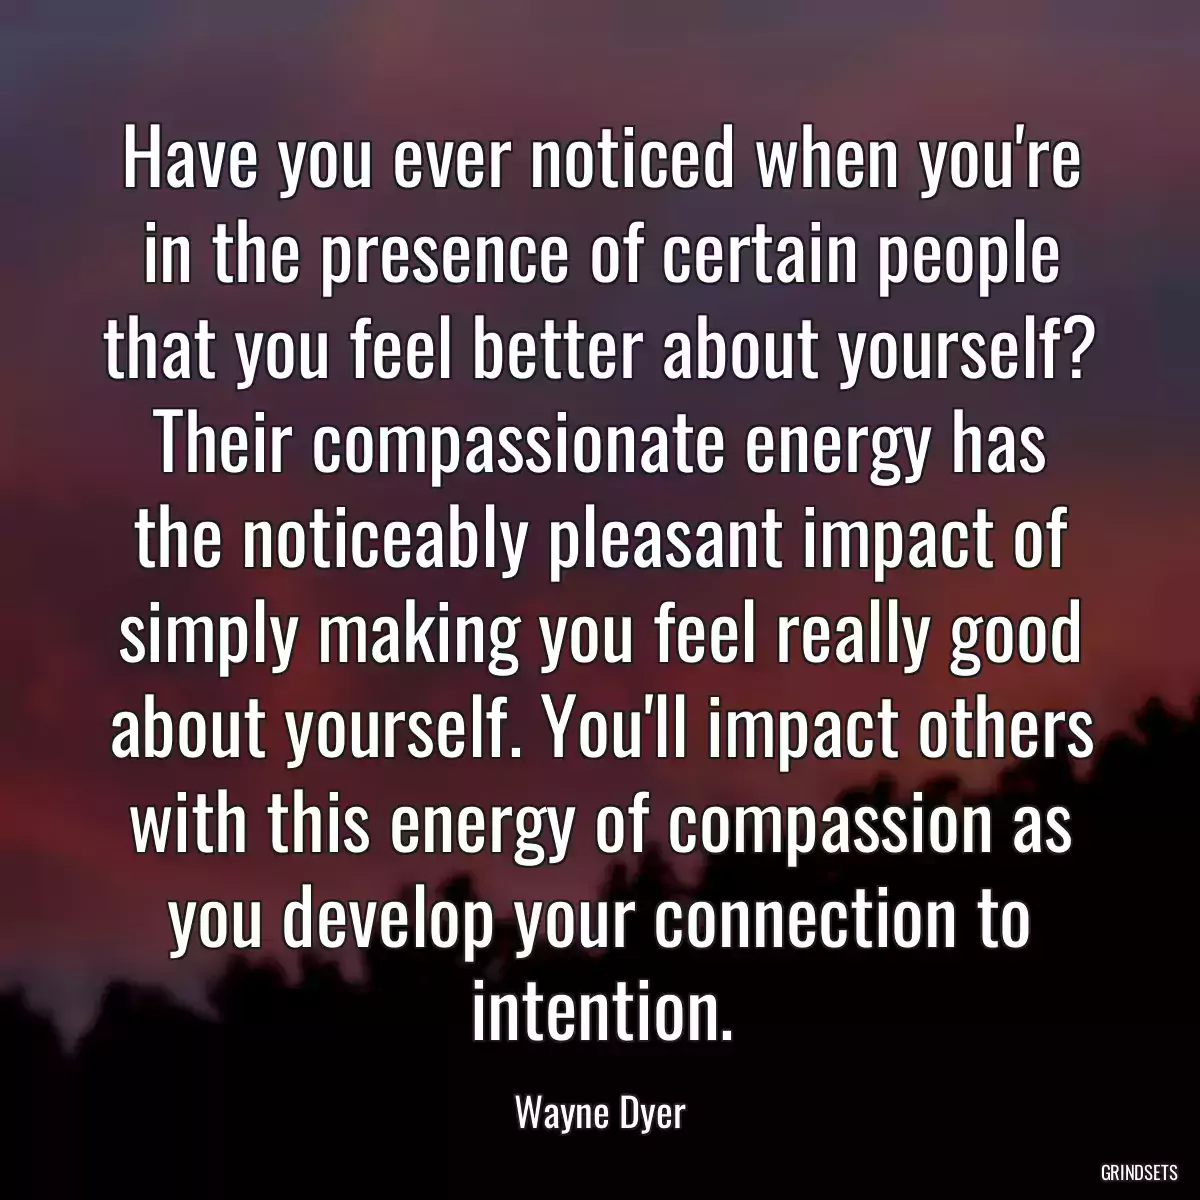 Have you ever noticed when you\'re in the presence of certain people that you feel better about yourself? Their compassionate energy has the noticeably pleasant impact of simply making you feel really good about yourself. You\'ll impact others with this energy of compassion as you develop your connection to intention.